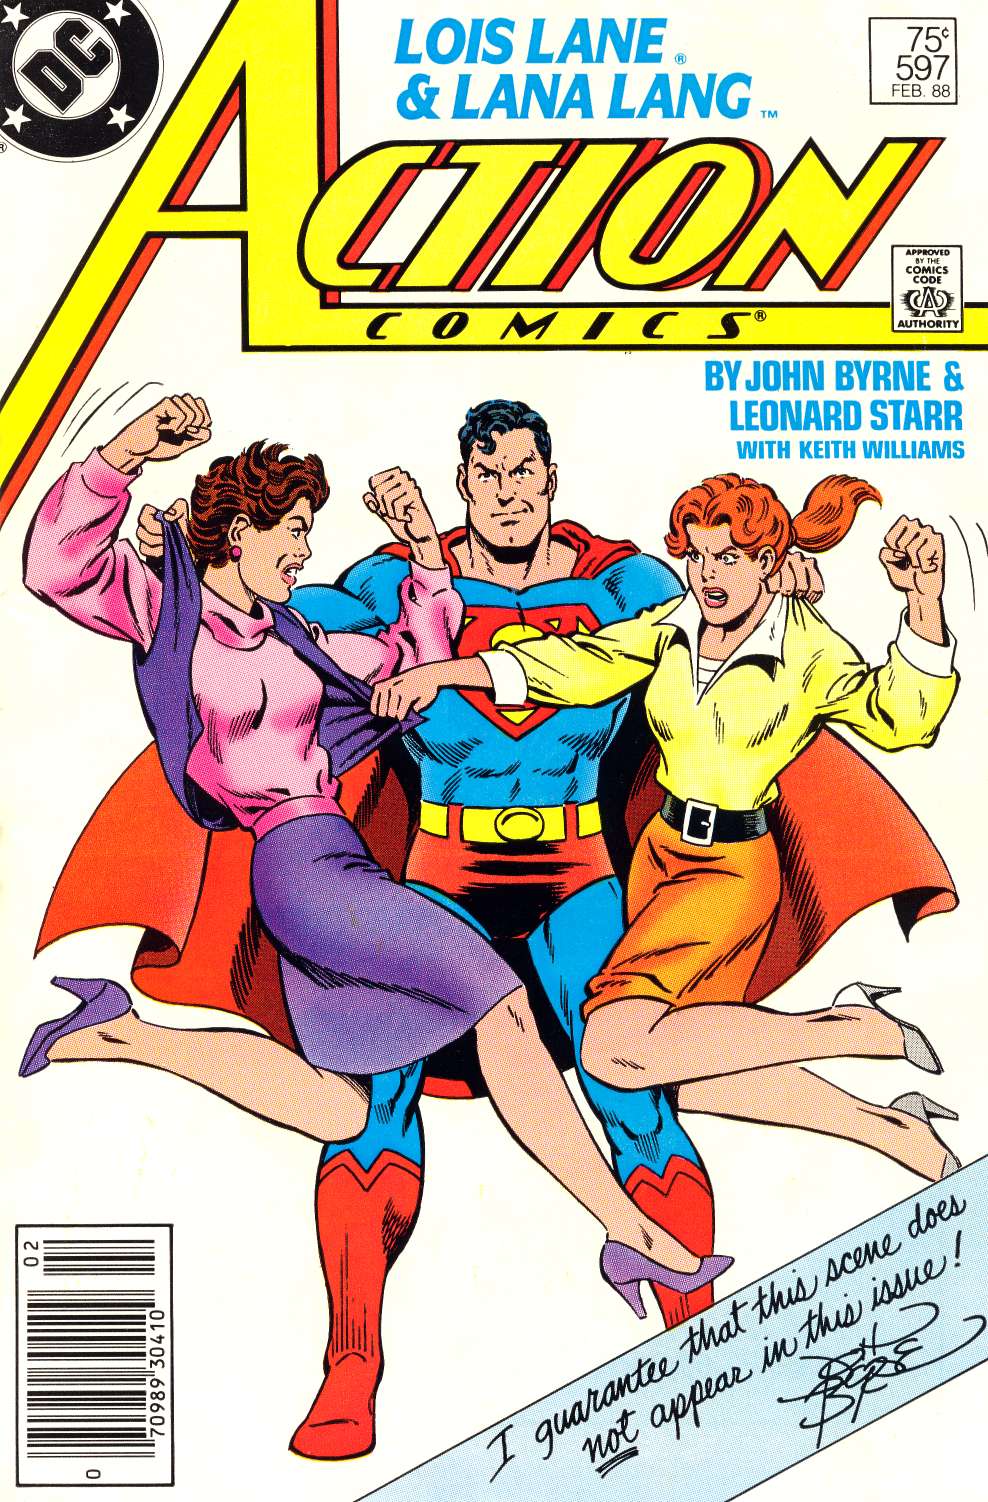 Read online Action Comics (1938) comic -  Issue #597 - 1